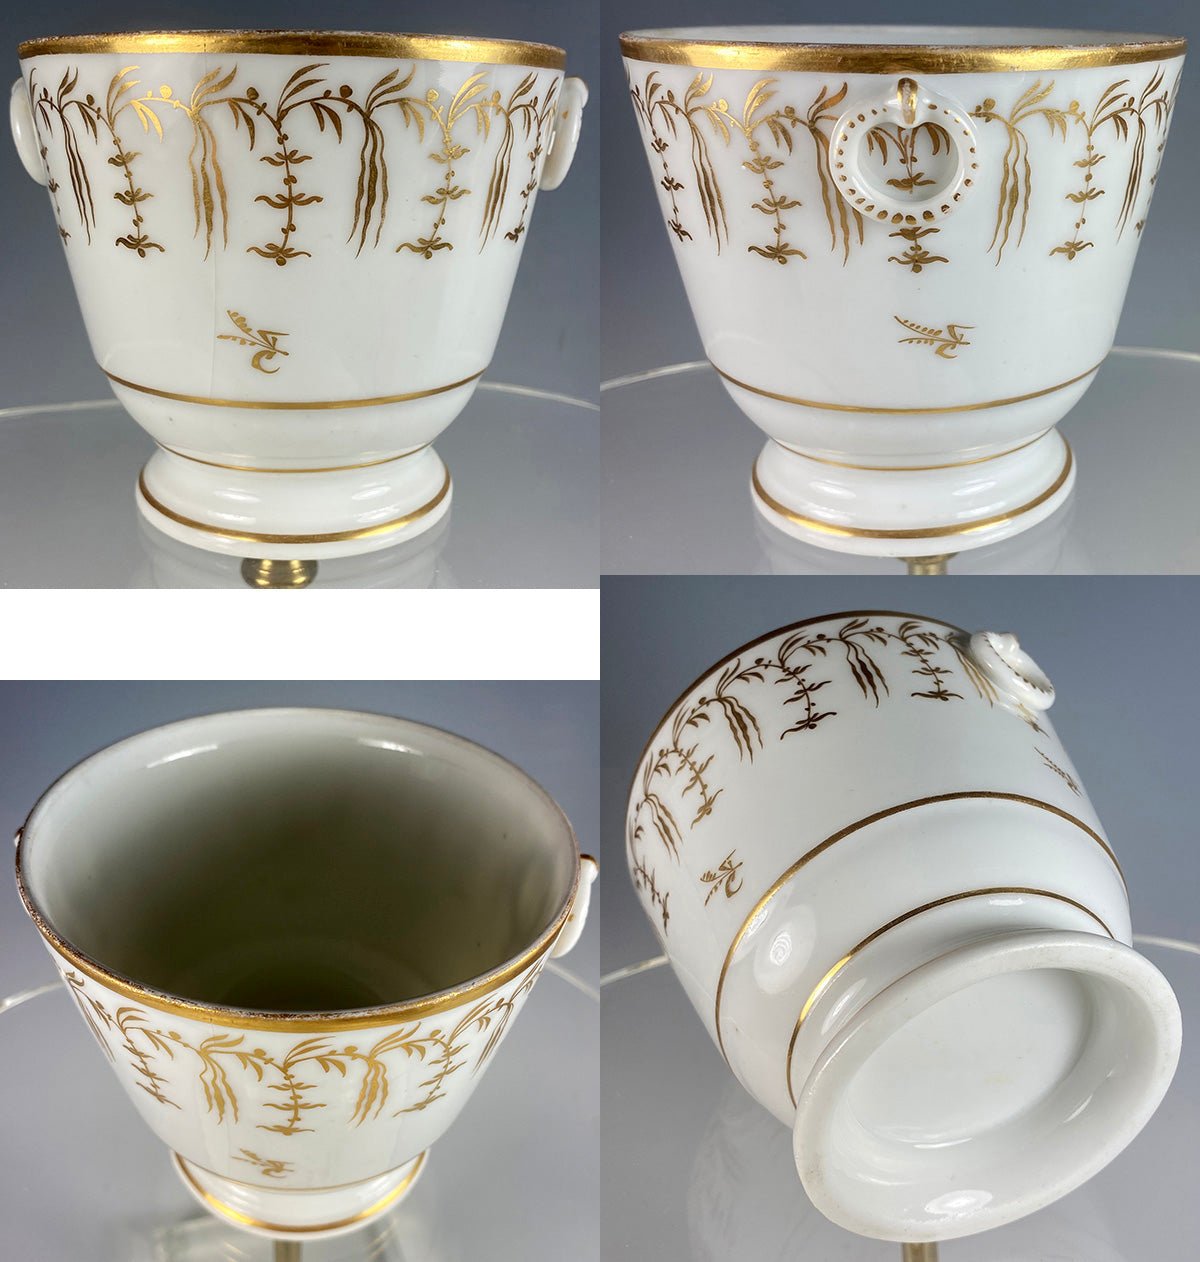 Large Antique French Porcelain Coffee Service, Old Paris and French Empire, Gold on White